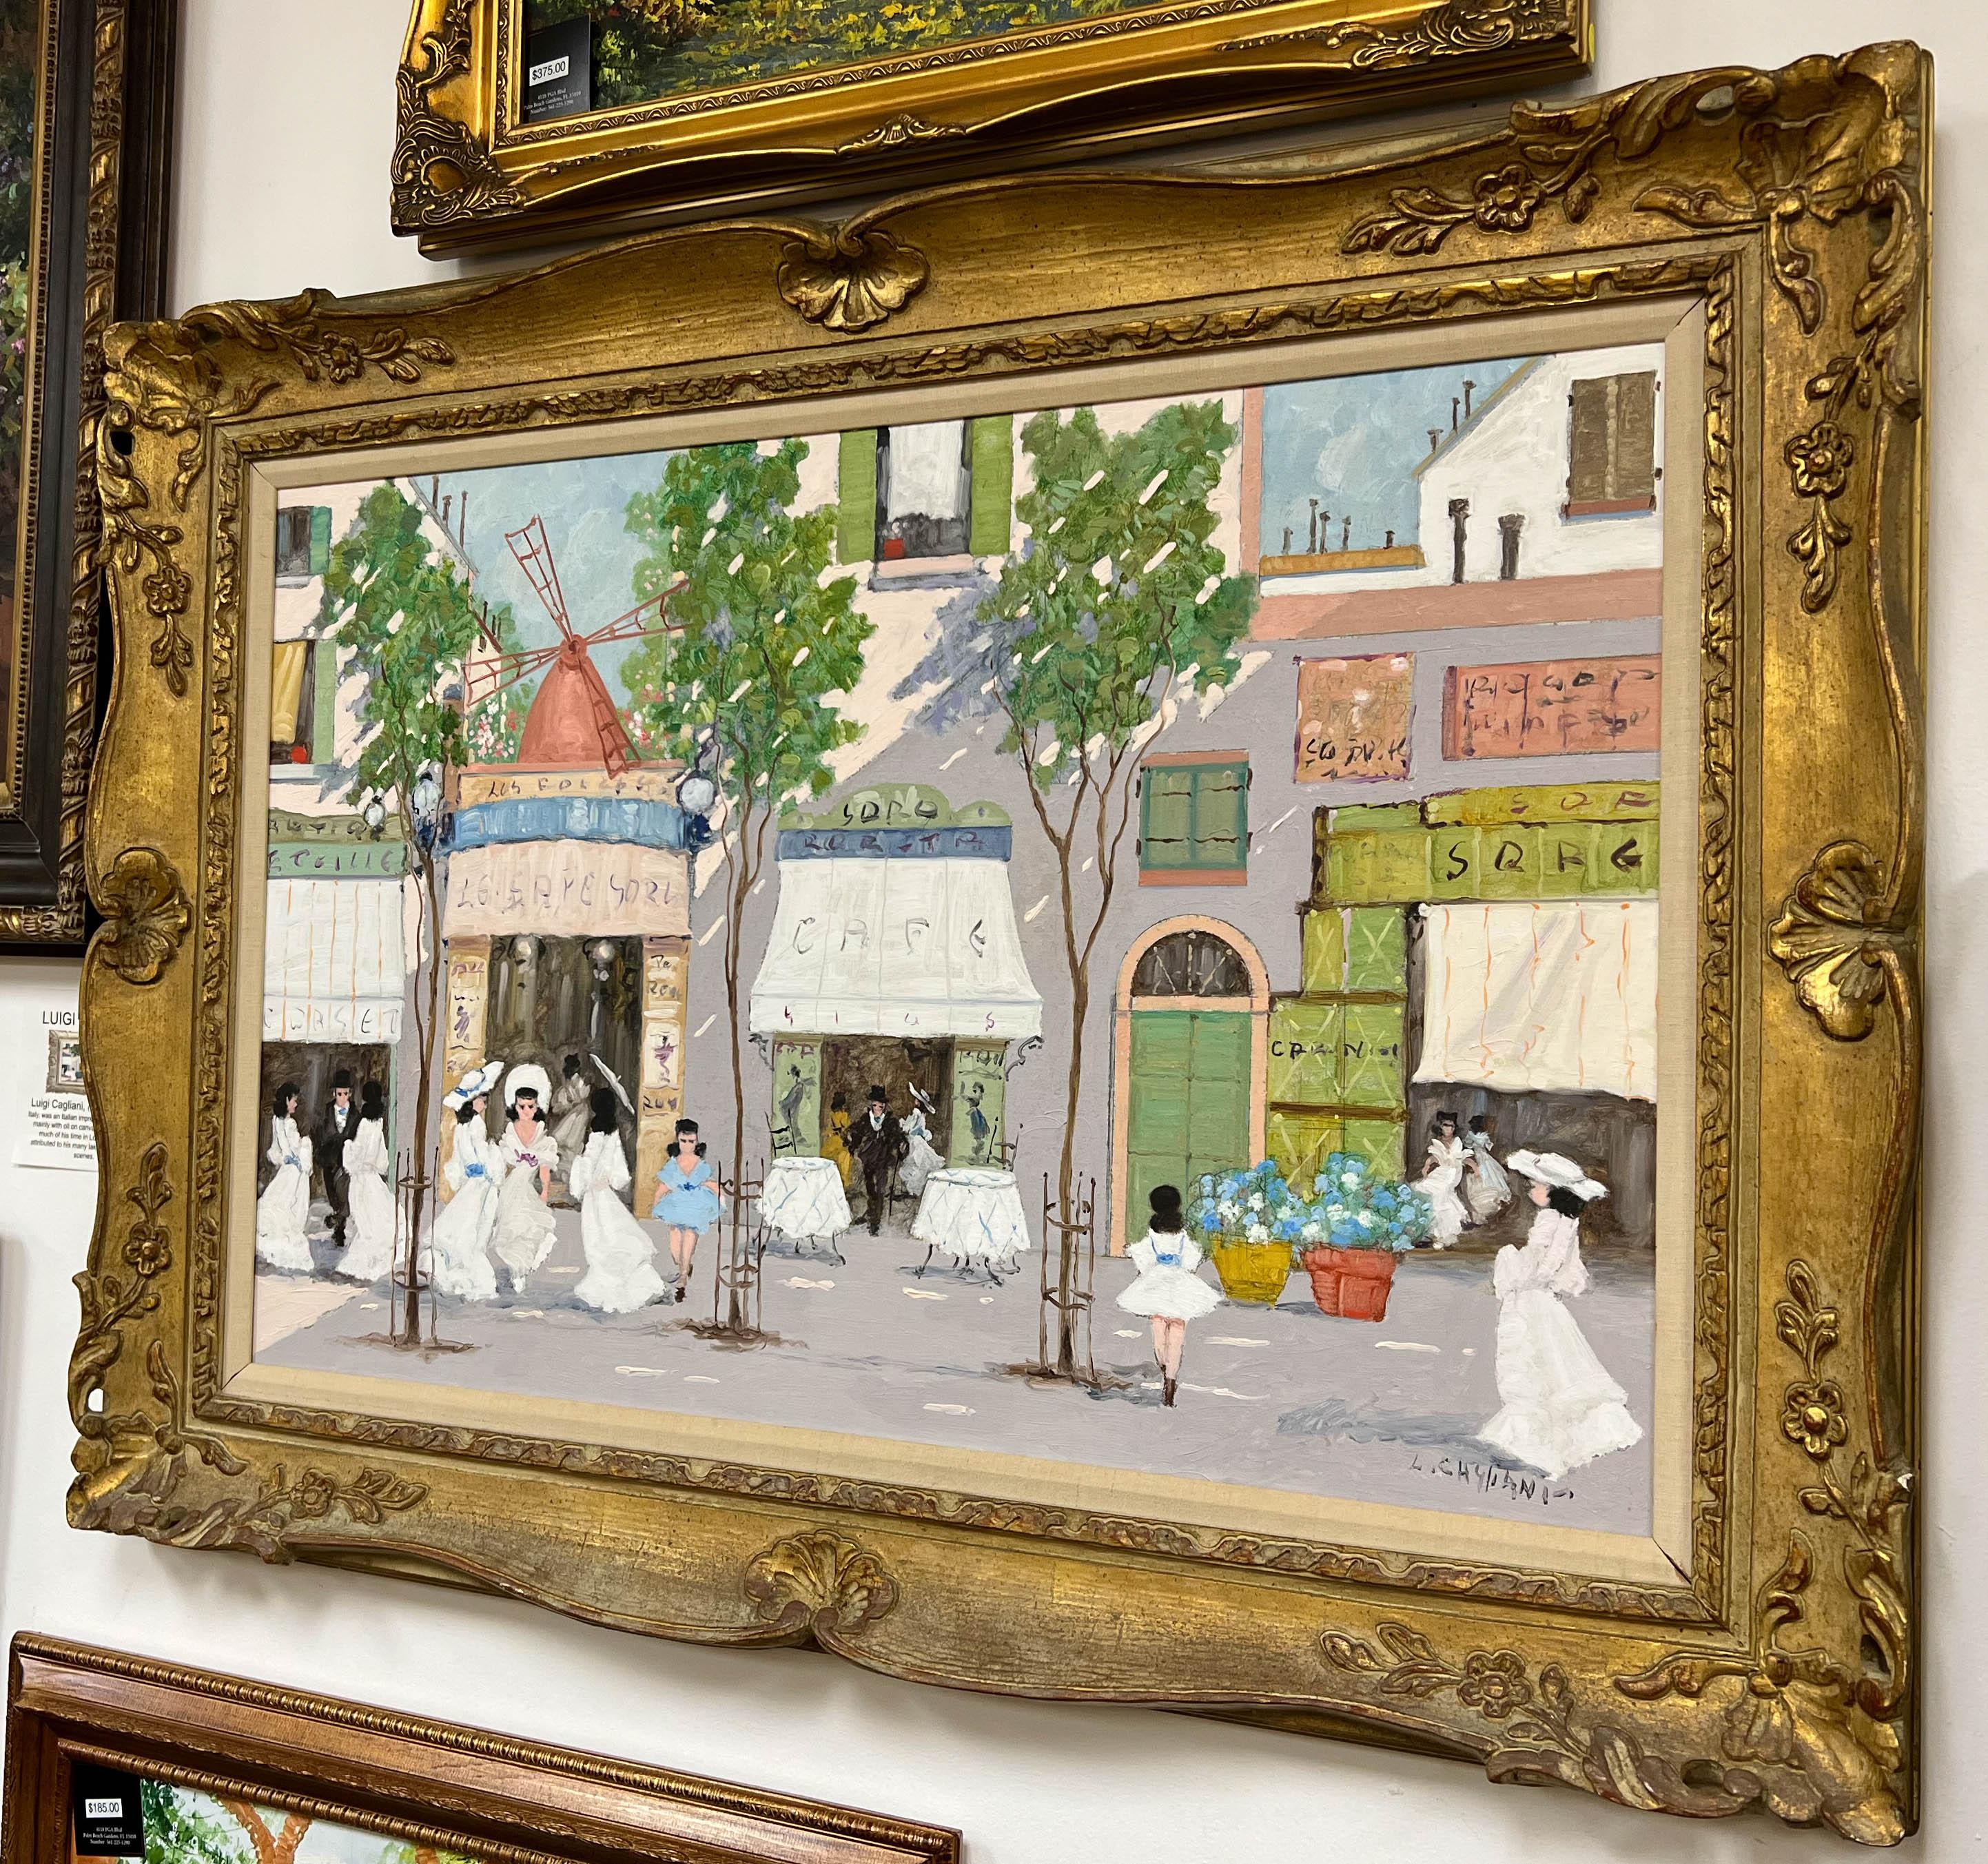 This Luigi Cagliani (1910-1987) oil on canvas of a Parisian Street Scene is in impressive condition. With a romantic movement, almost 19th Century sense, Cagliani presents a whimsical oil painting depicting a marketplace street scene in Paris,